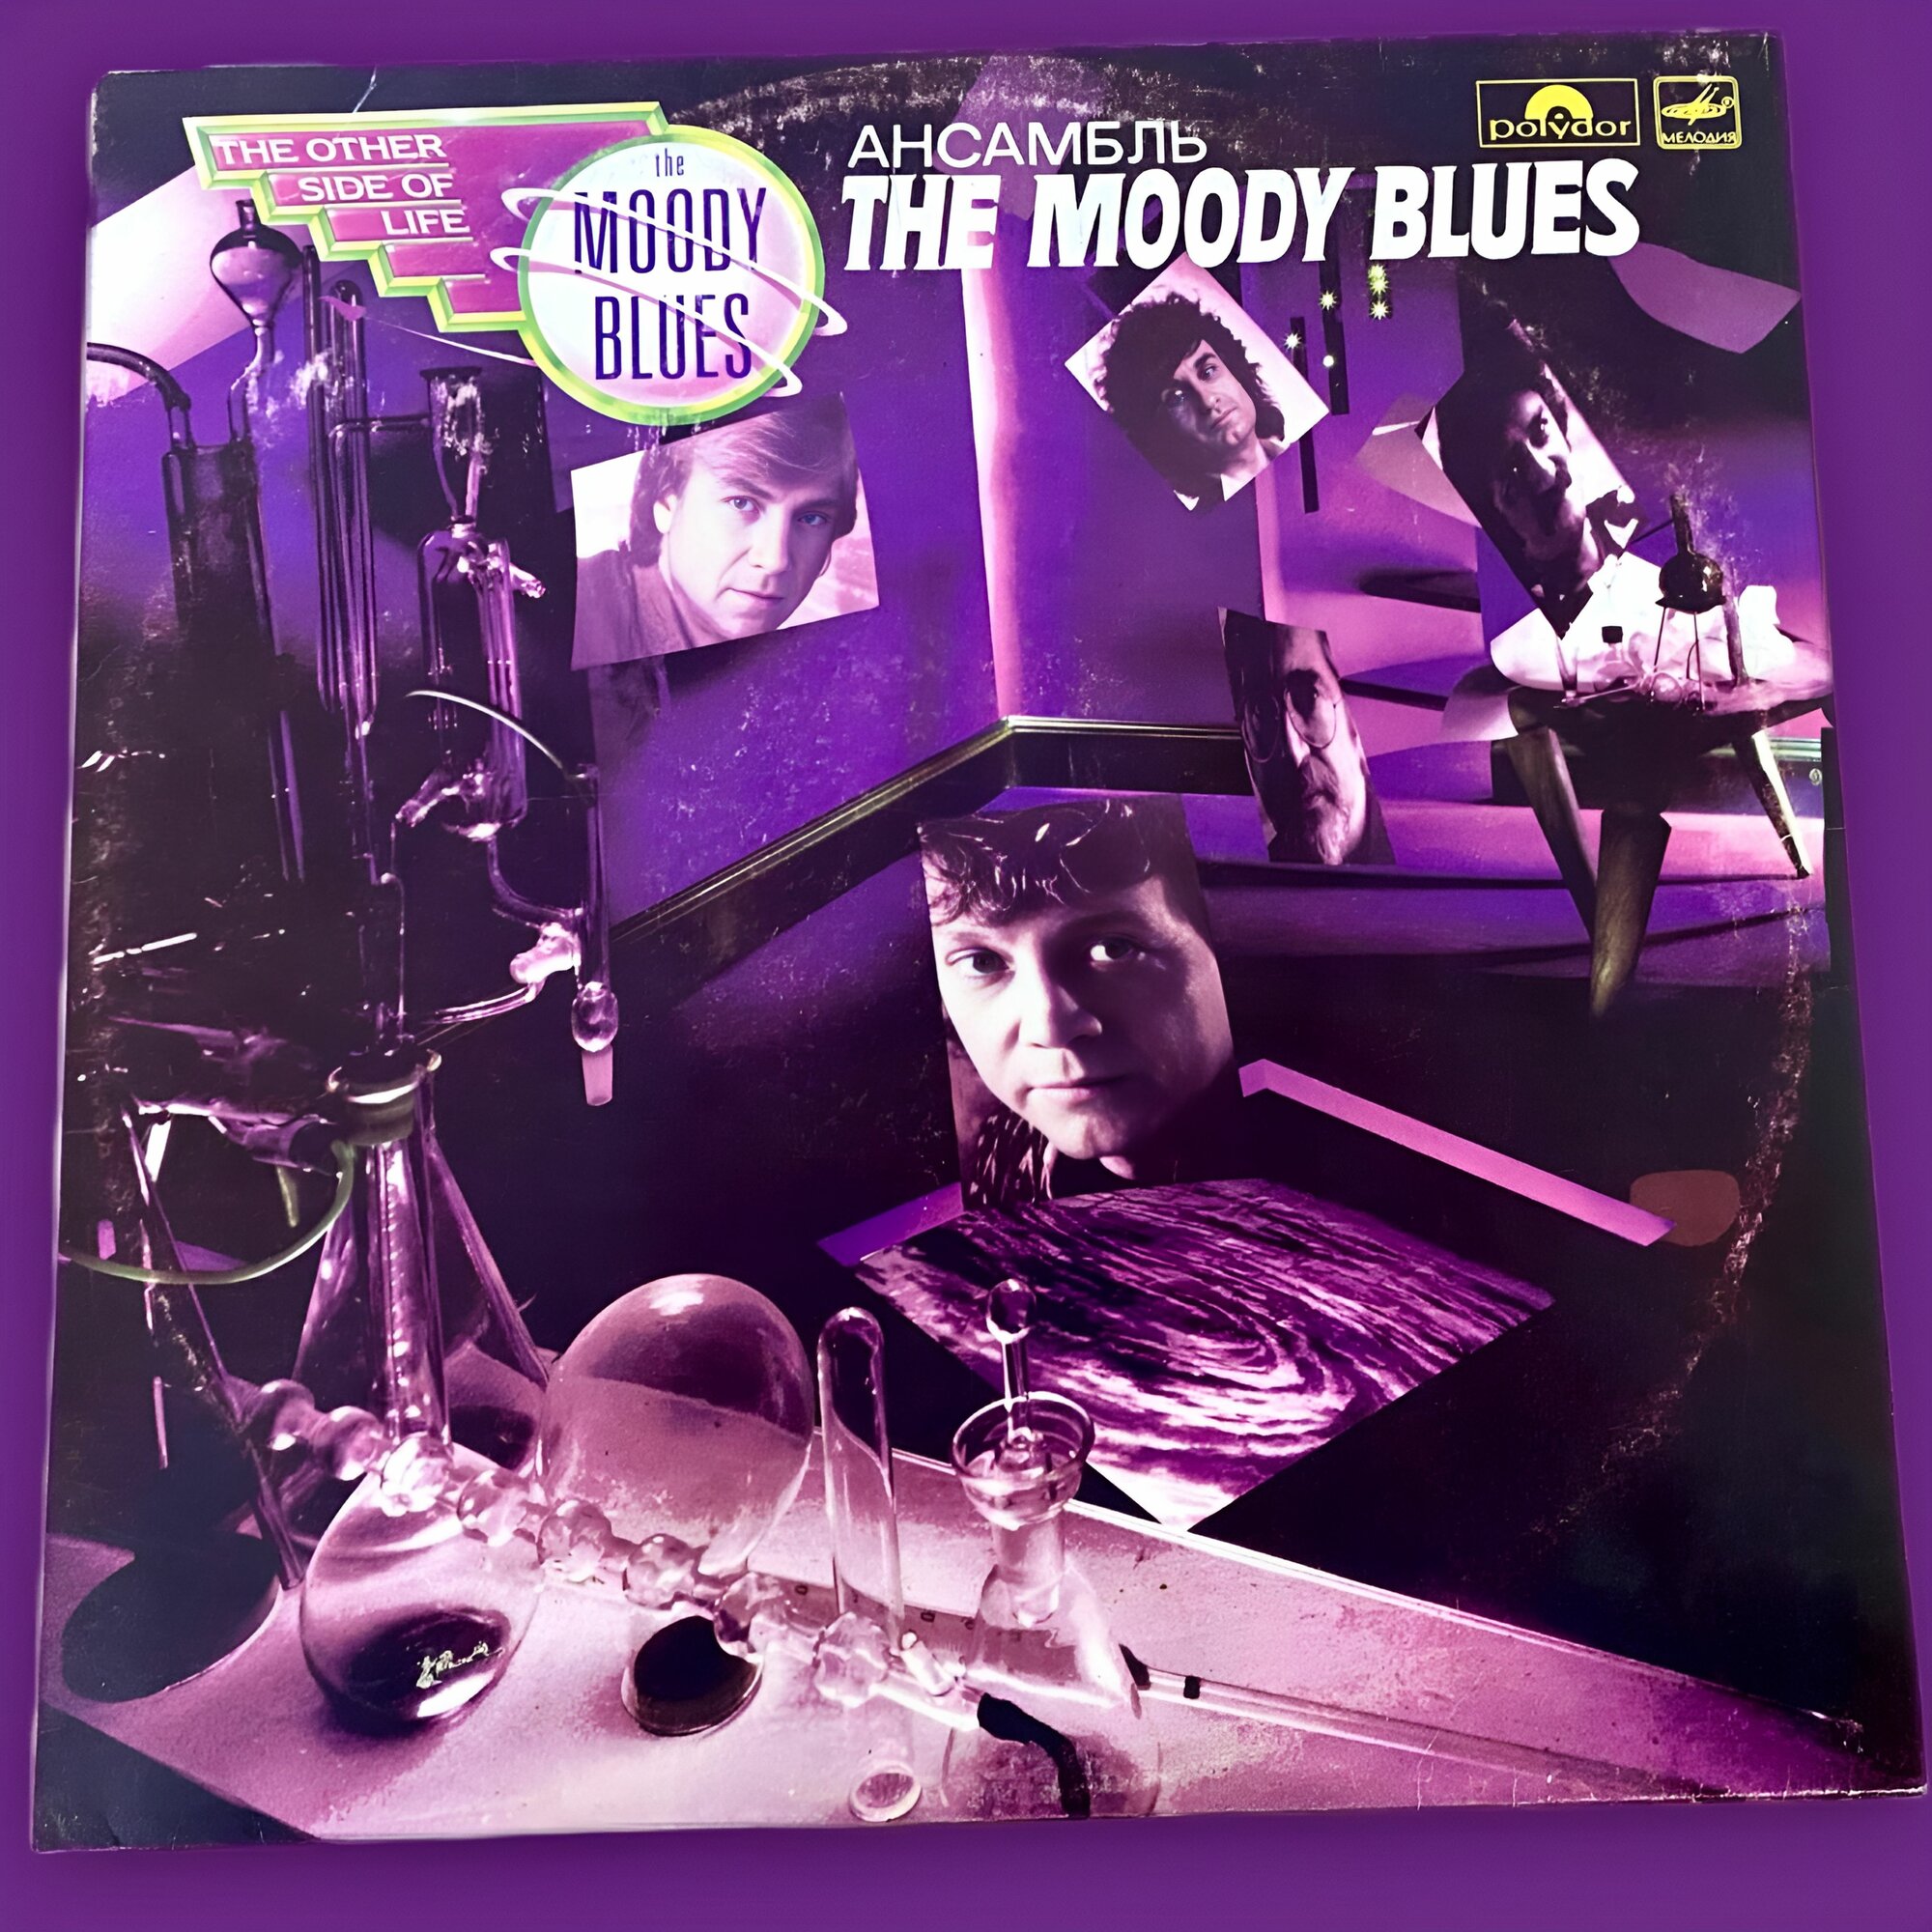 The Moody Blues - The other side of life Виниловая пластинка LP